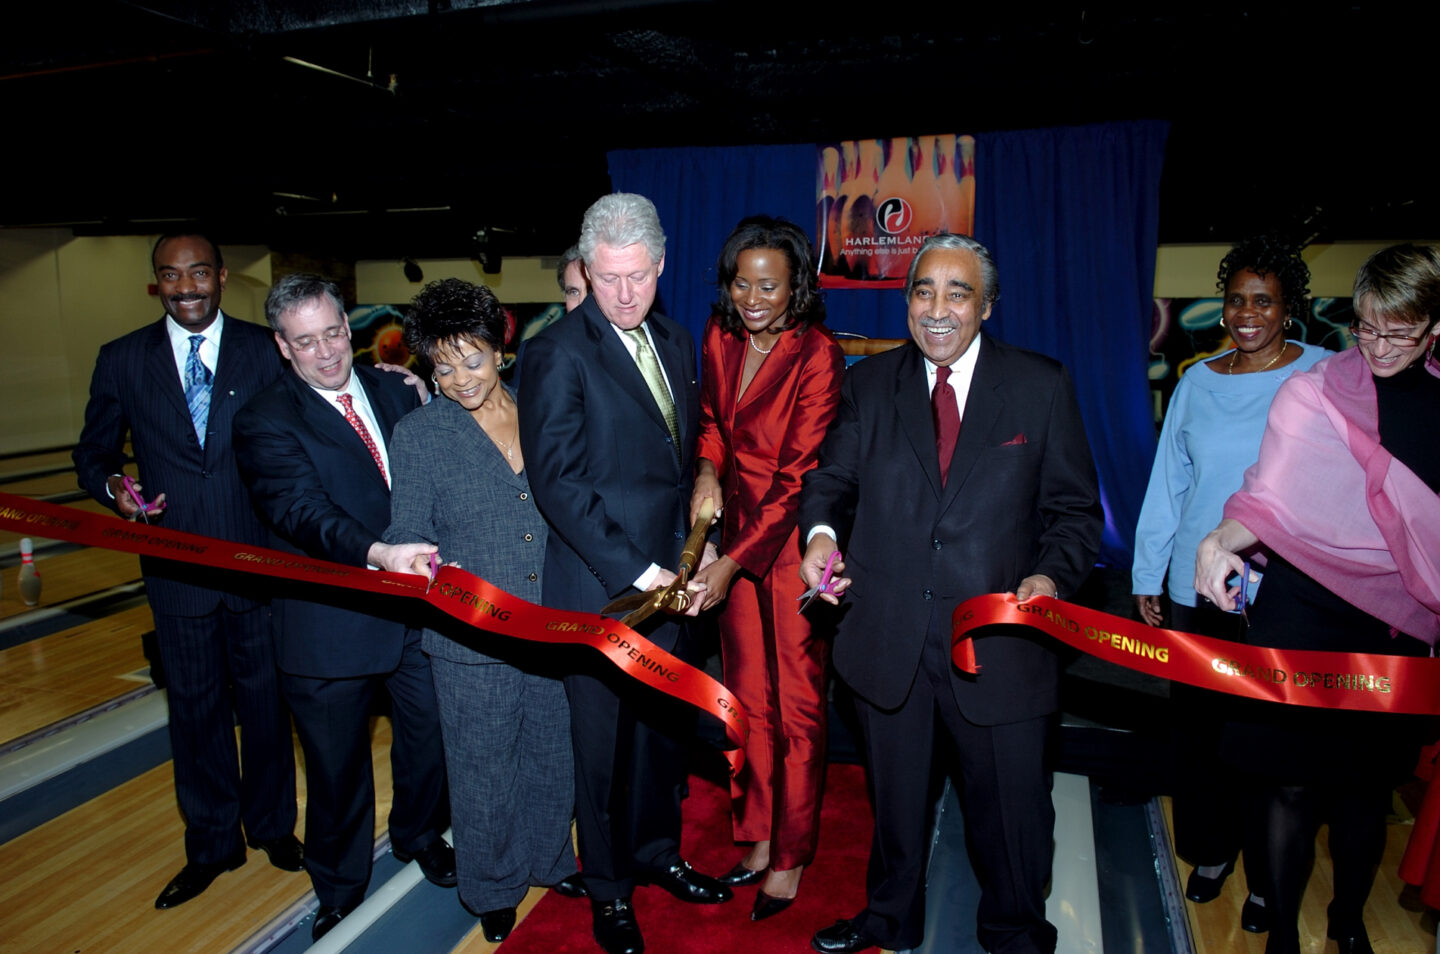 President Clinton, local leaders, and small business owners help open a bowling alley in Harlem, NY